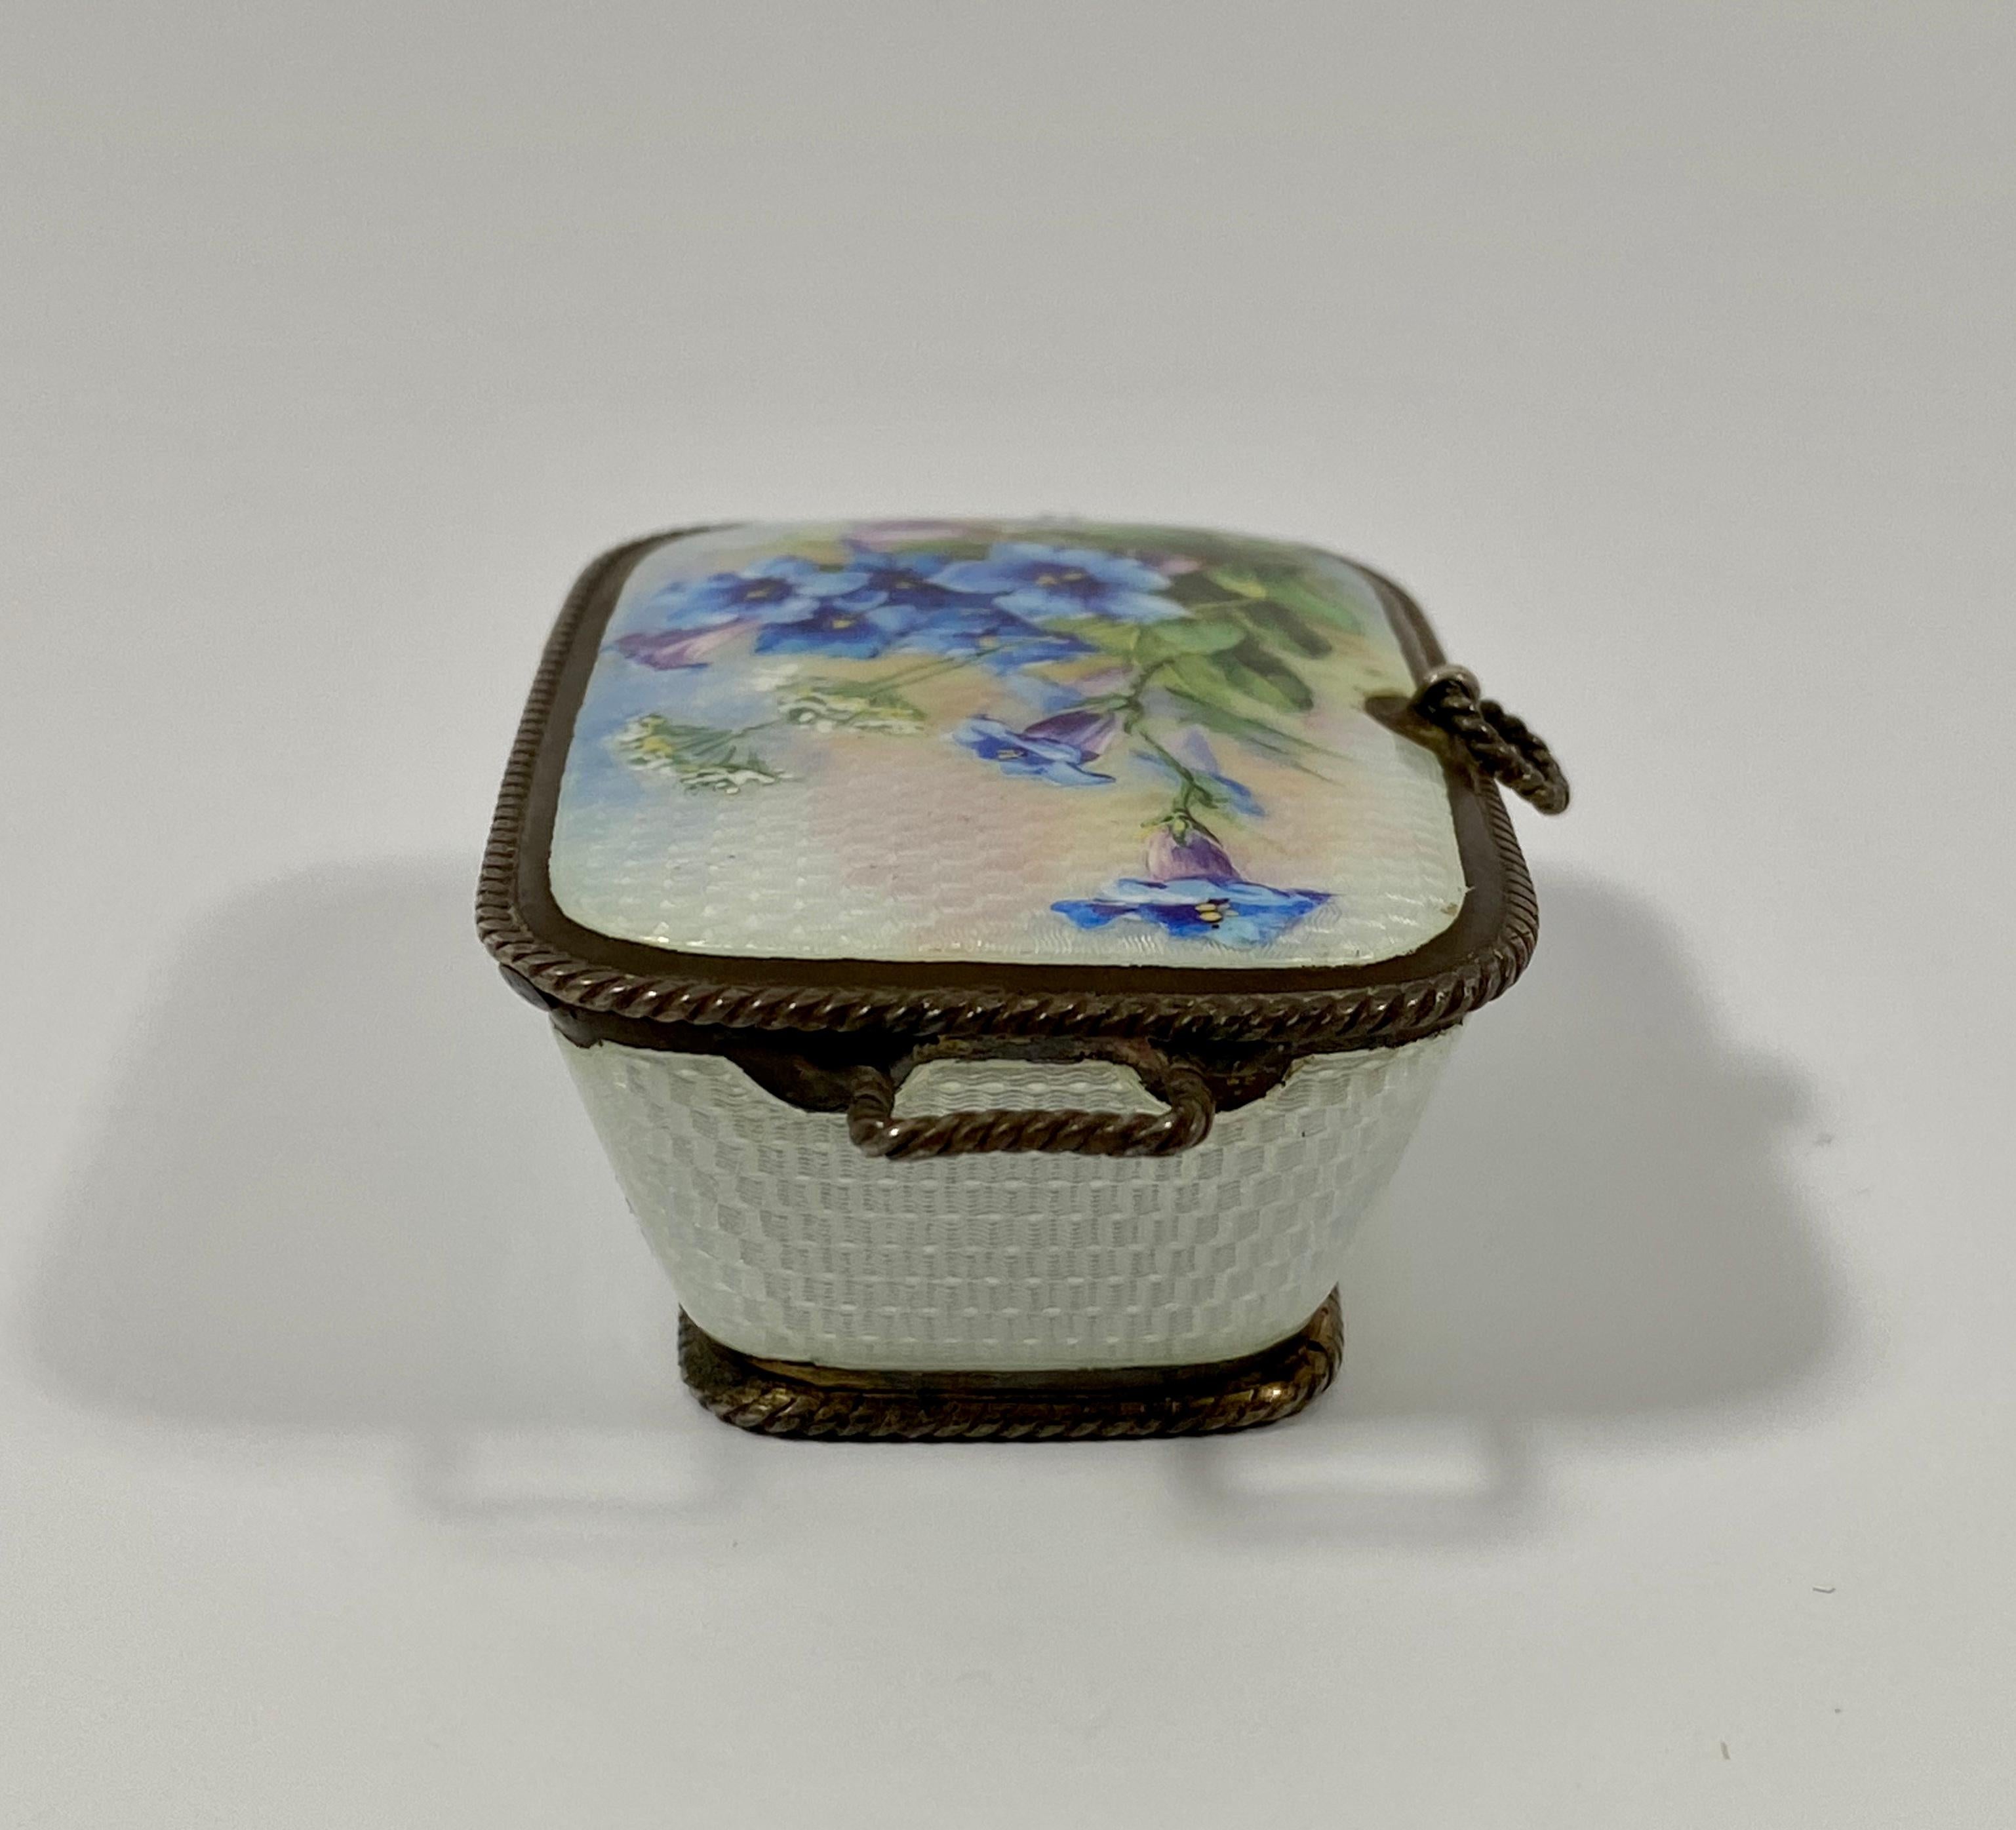 Silver and Enamel Box, Dated 1911, Import Marks for Cohen & Charles 3